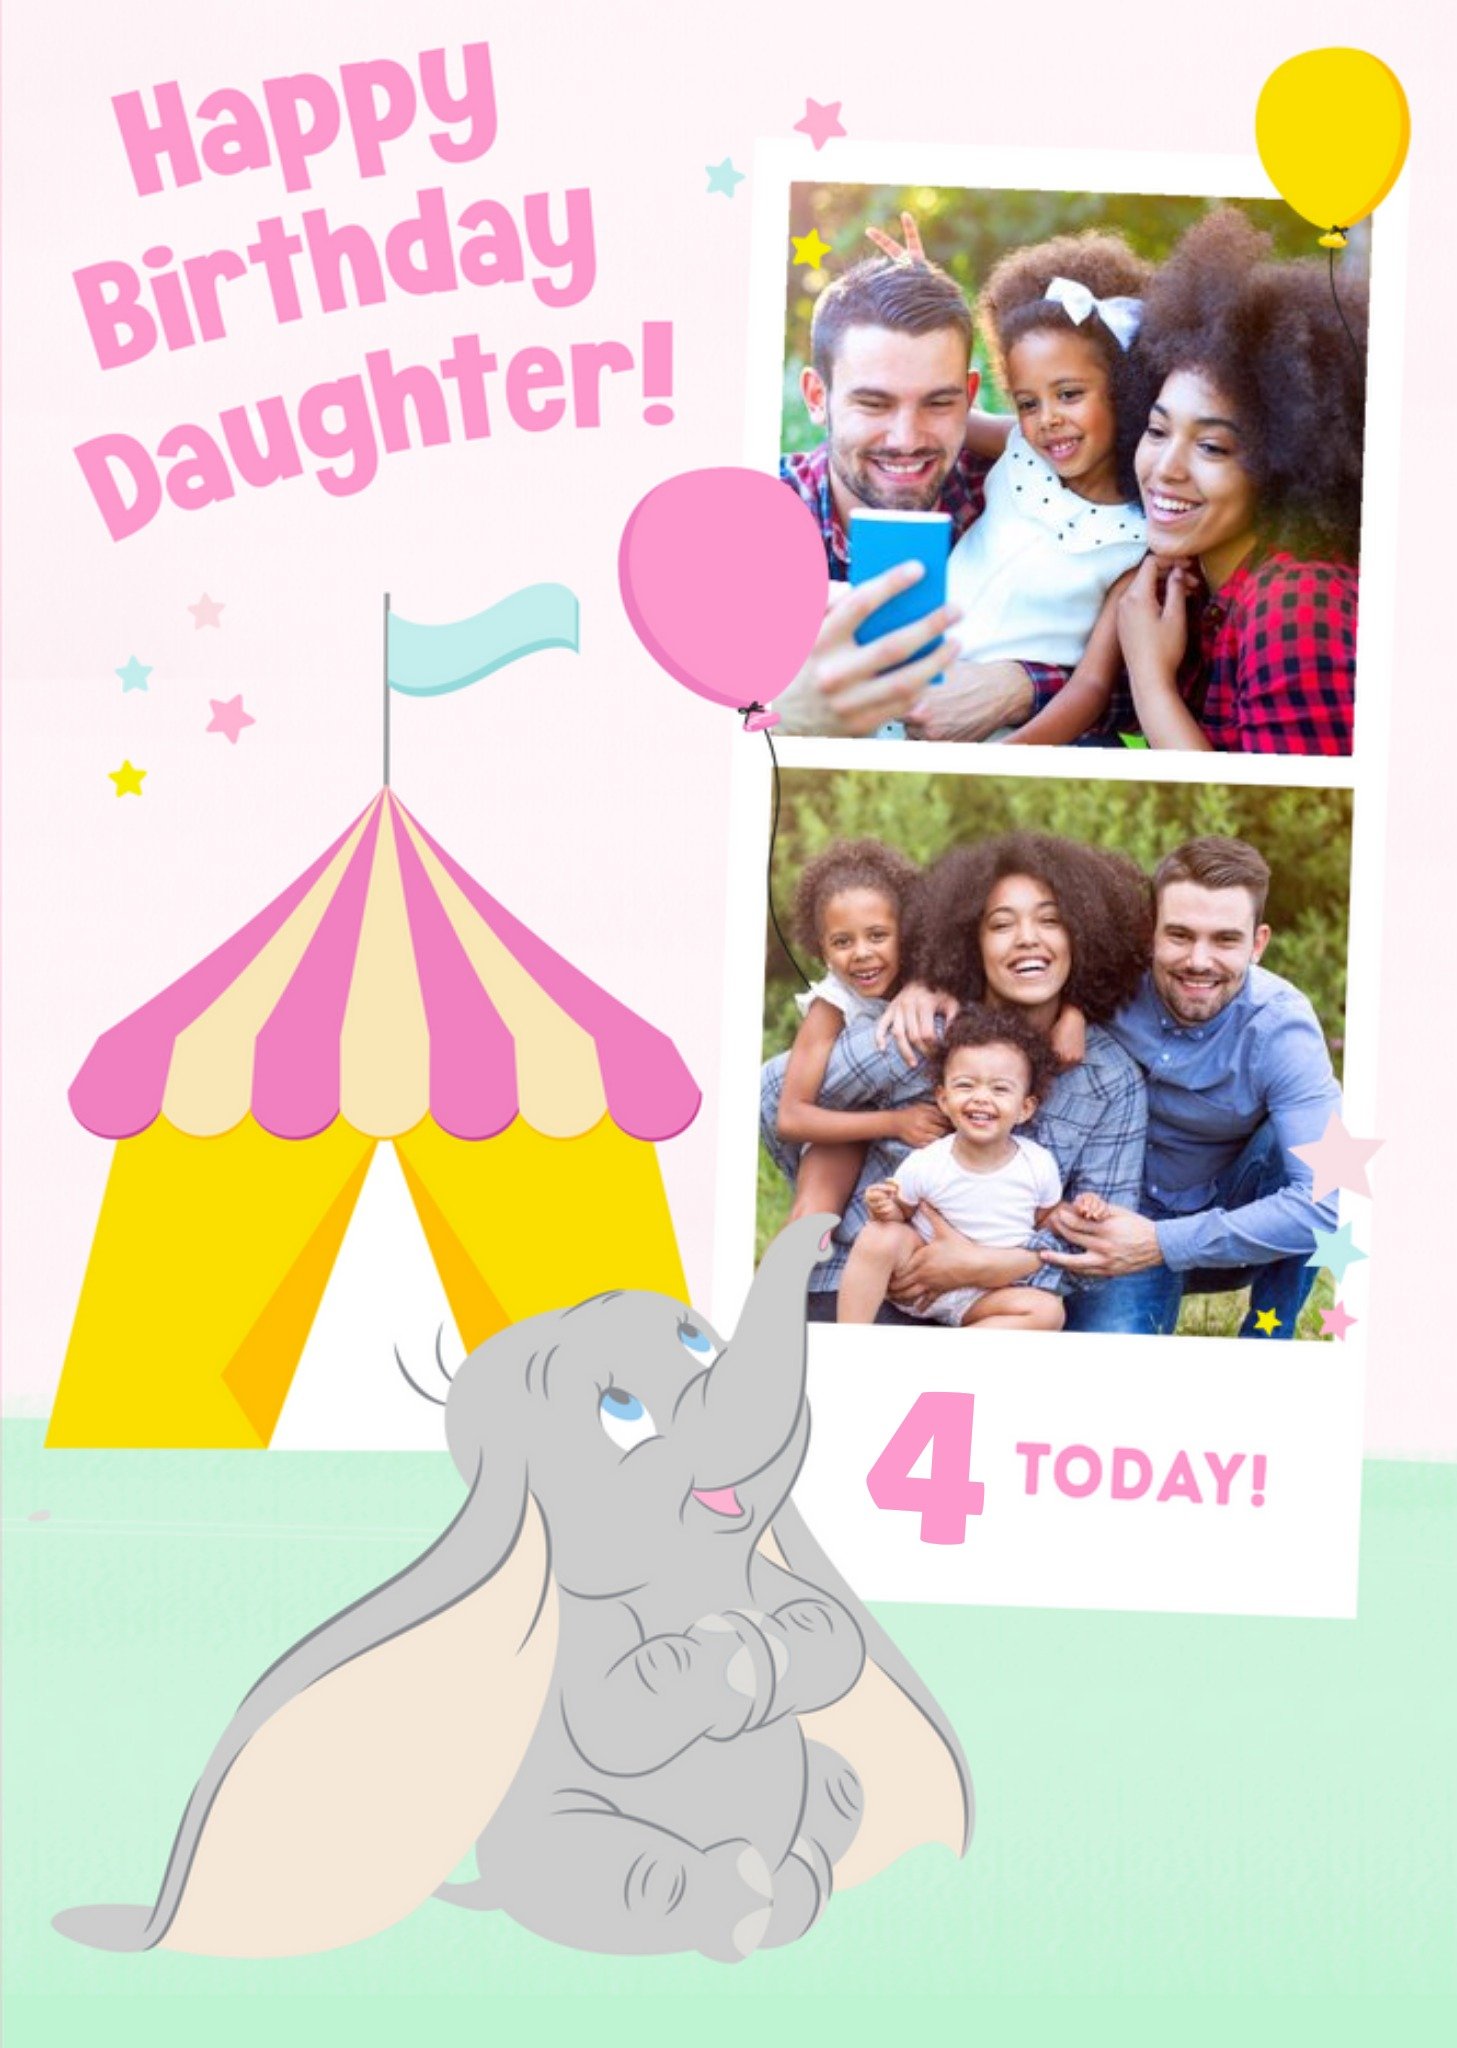 Disney Dumbo 4 Today Photo Upload Card For Daughter Ecard